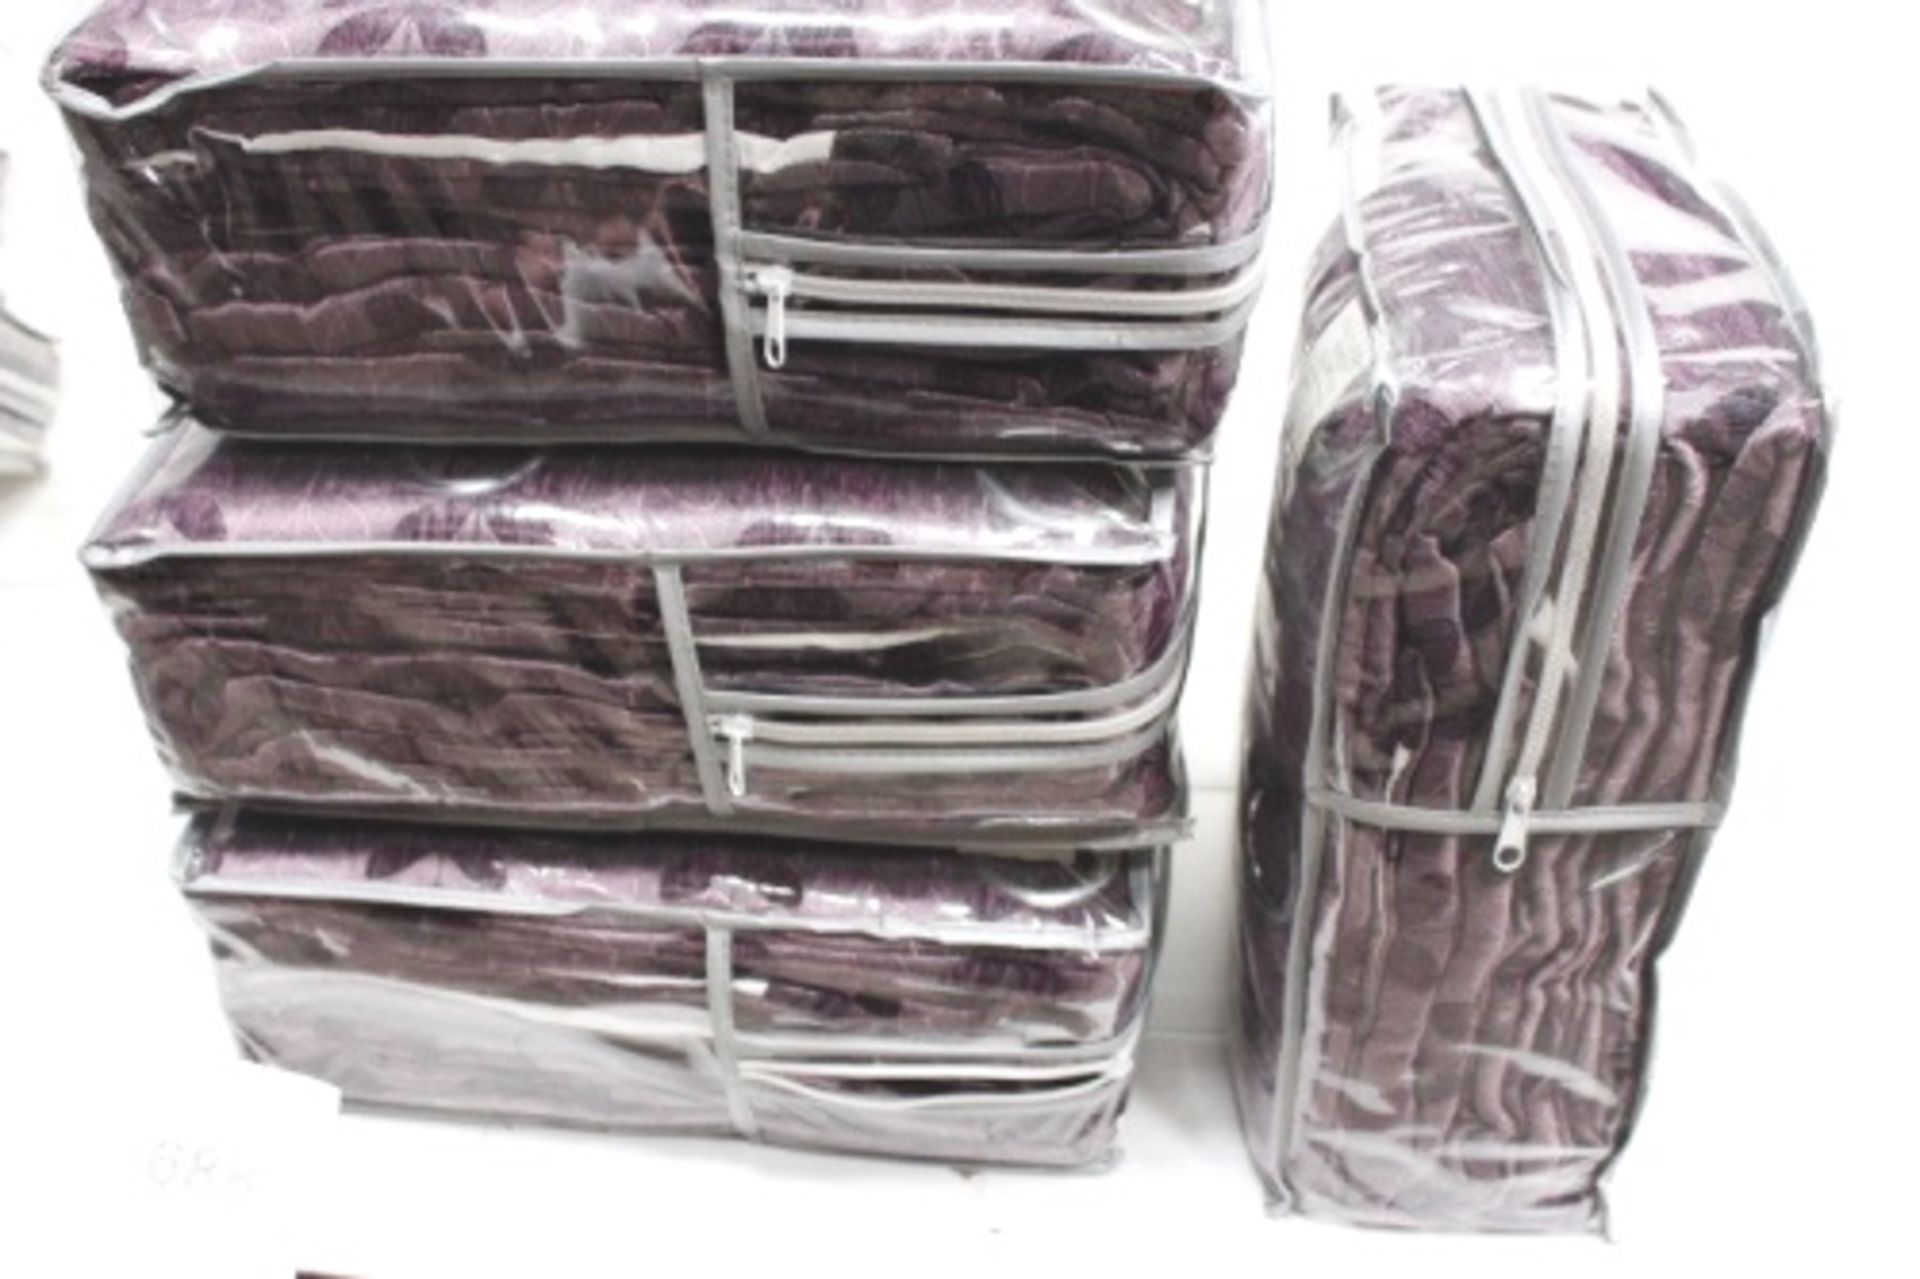 4 x Jeff Banks Home Alison Sierra RMC aubergine fully lined curtains, size 229 x 229cm - New in - Image 3 of 3